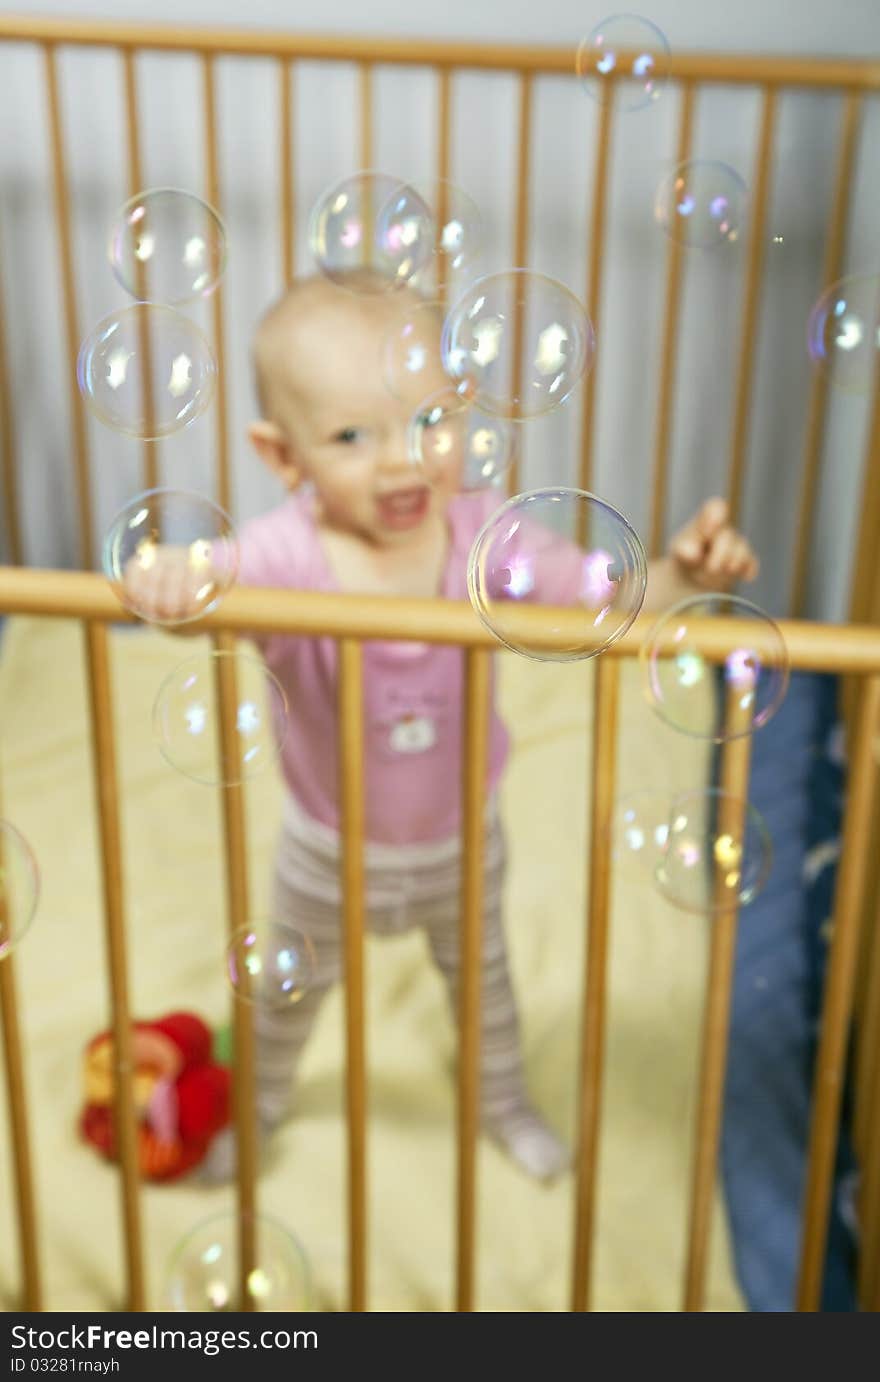 Baby and bubbles.Bubbles in focus, baby out of focus. Baby and bubbles.Bubbles in focus, baby out of focus.